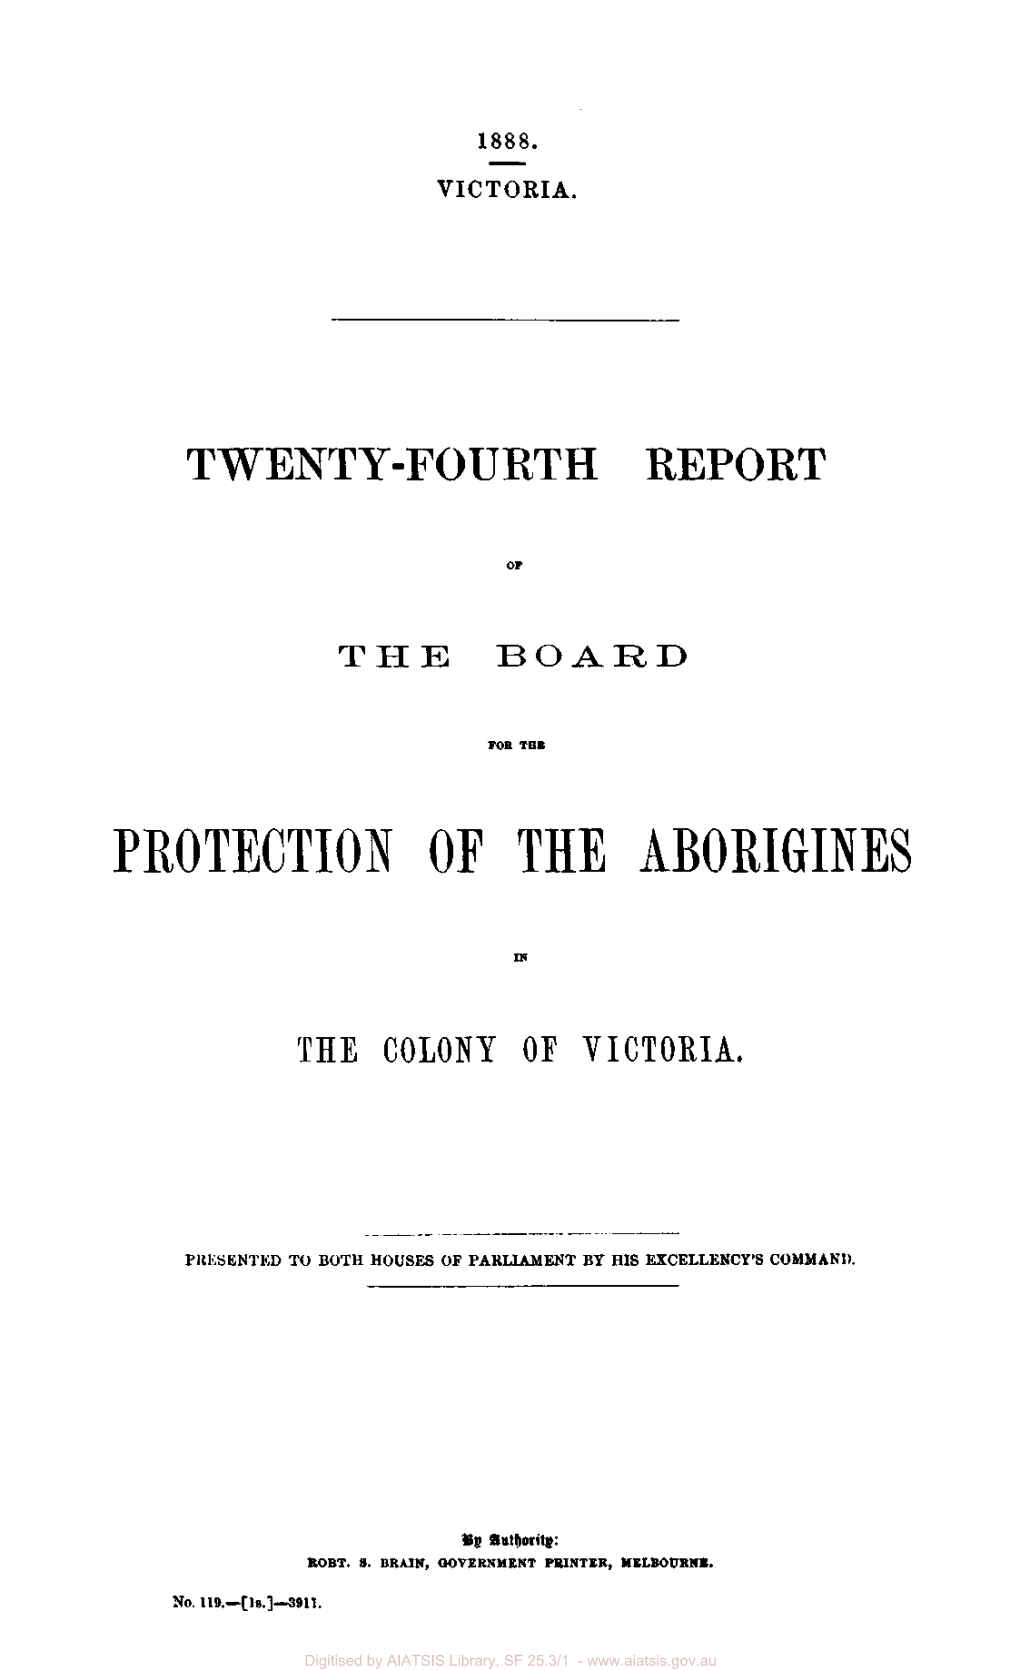 Twenty Fourth Report of the Board for the Protectopn of the Aborigines in the Colony of Victoria, 1888